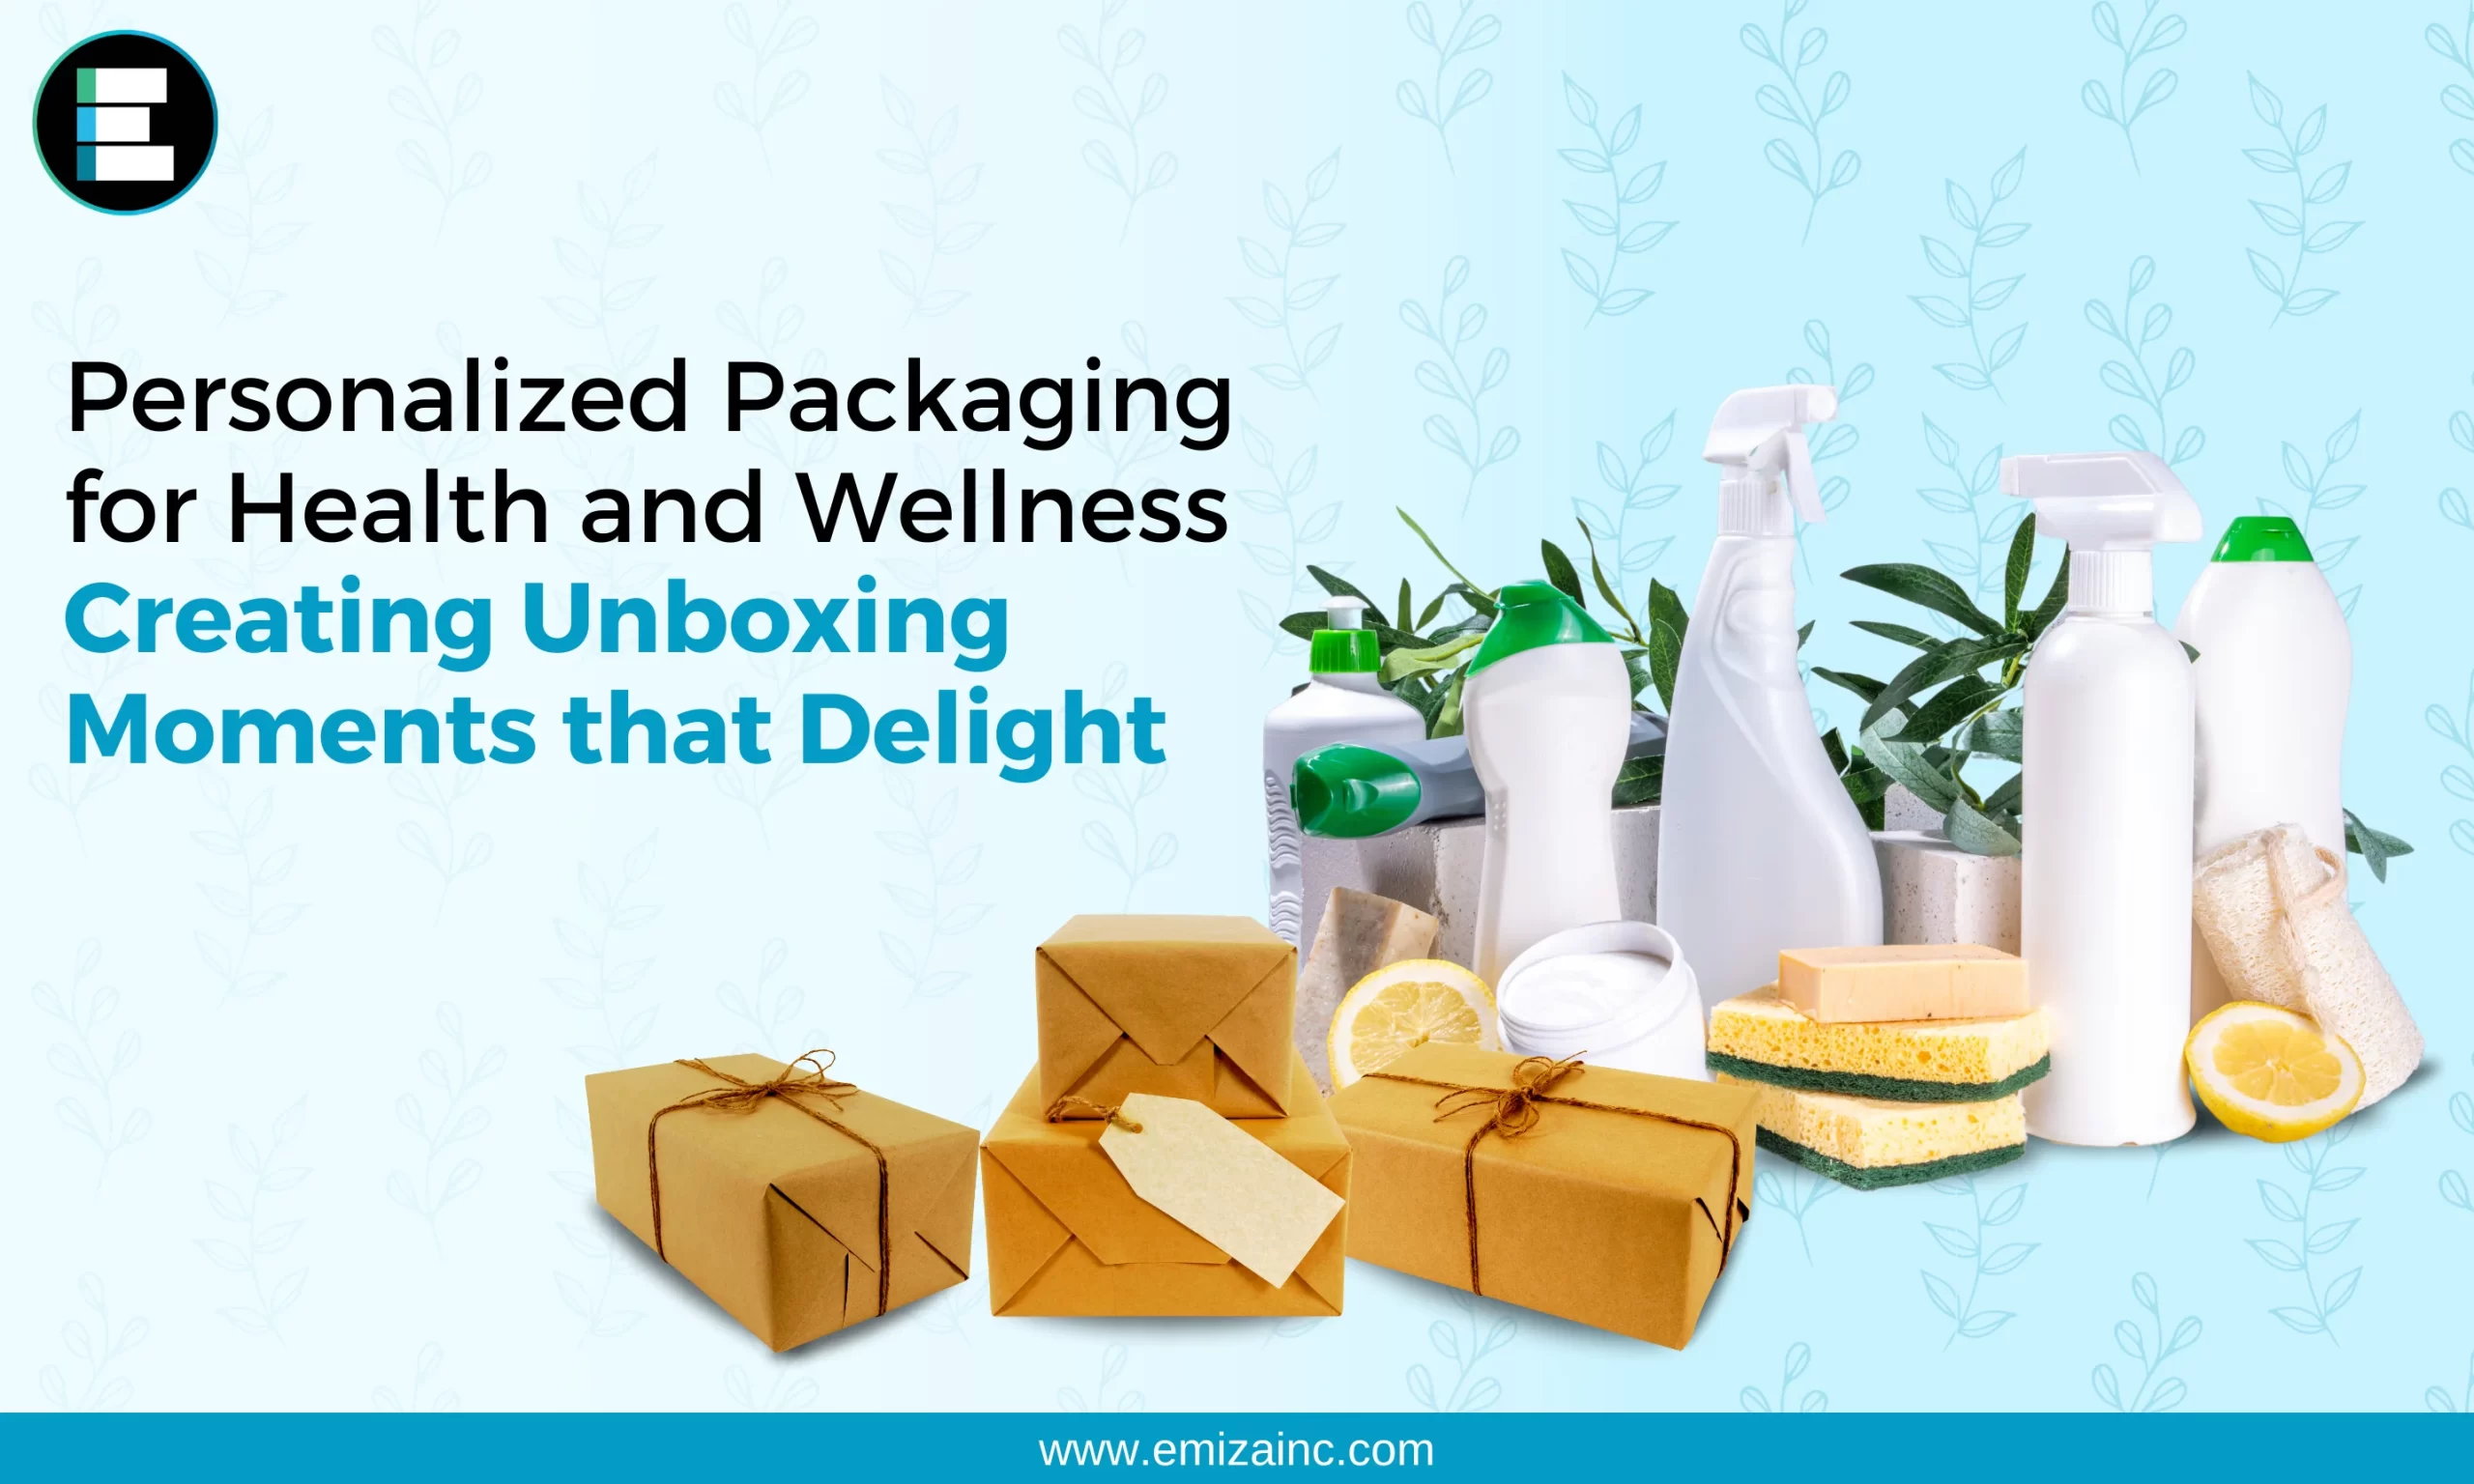 Personalized Packaging for Health and Wellness Creating Unboxing Moments that Delight